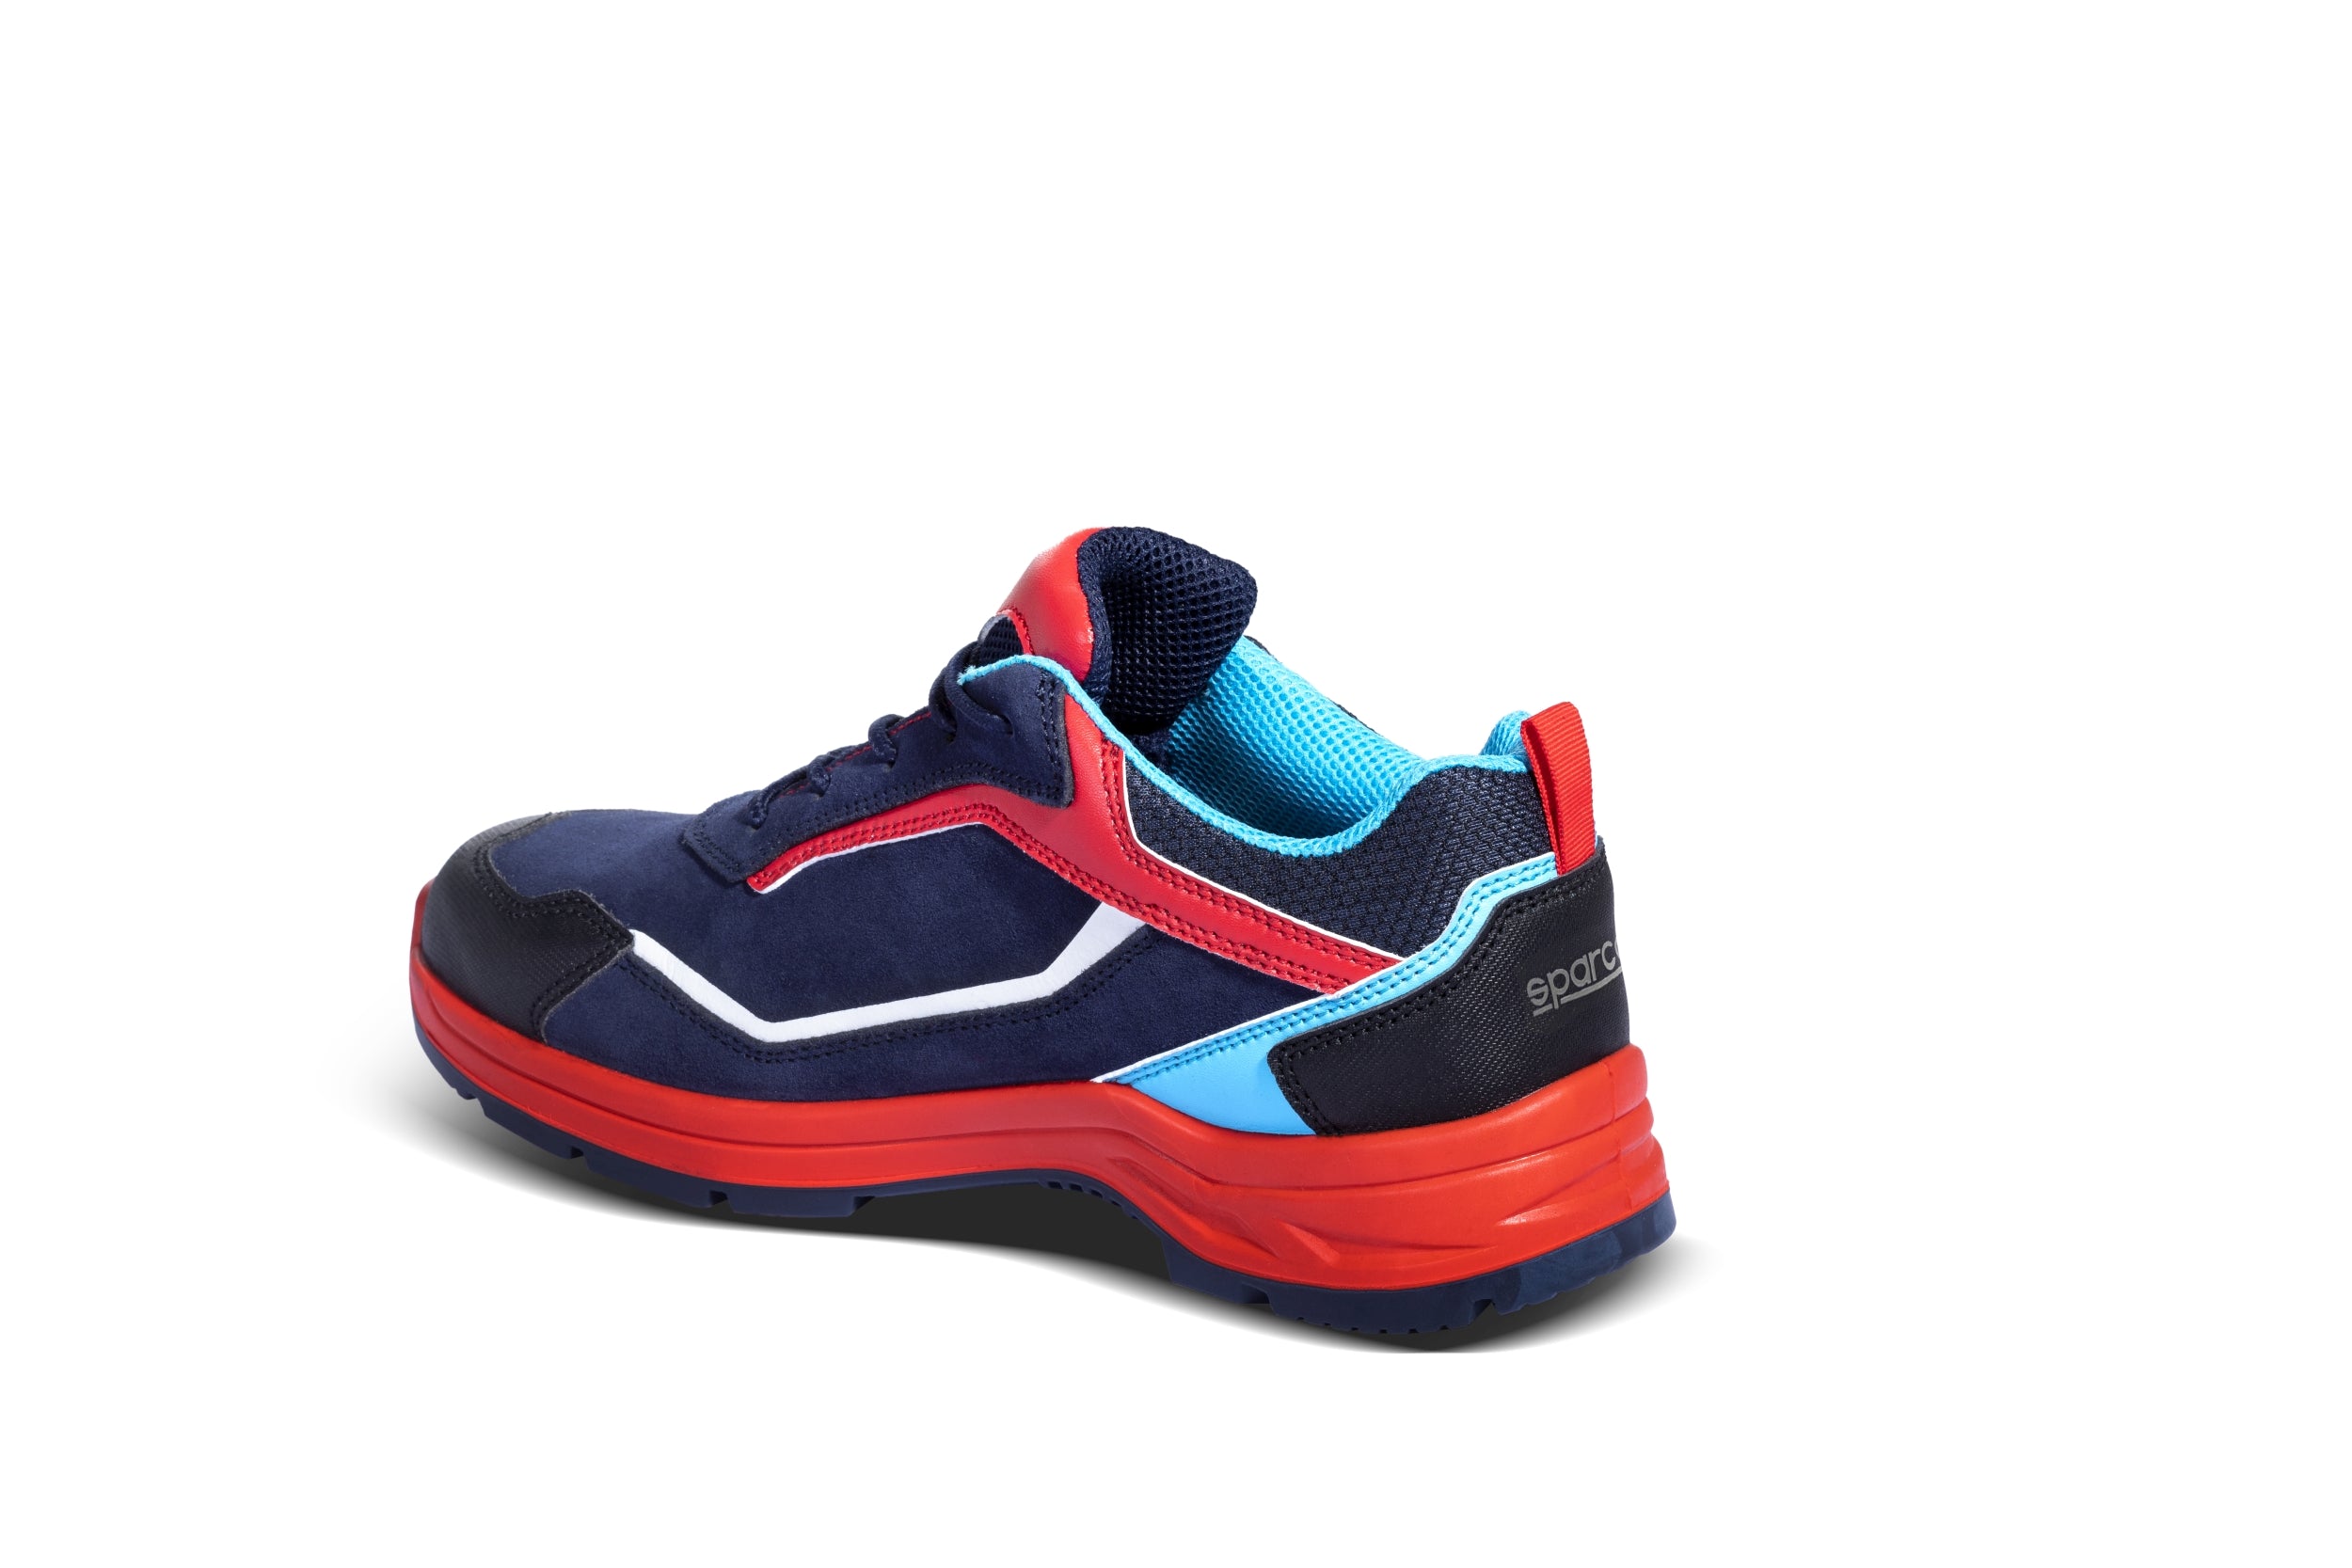 SPARCO 07537MR46BMRS Indy ESD S3 MARTINI RACING Shoes, navy blue/red, size 46 Photo-1 